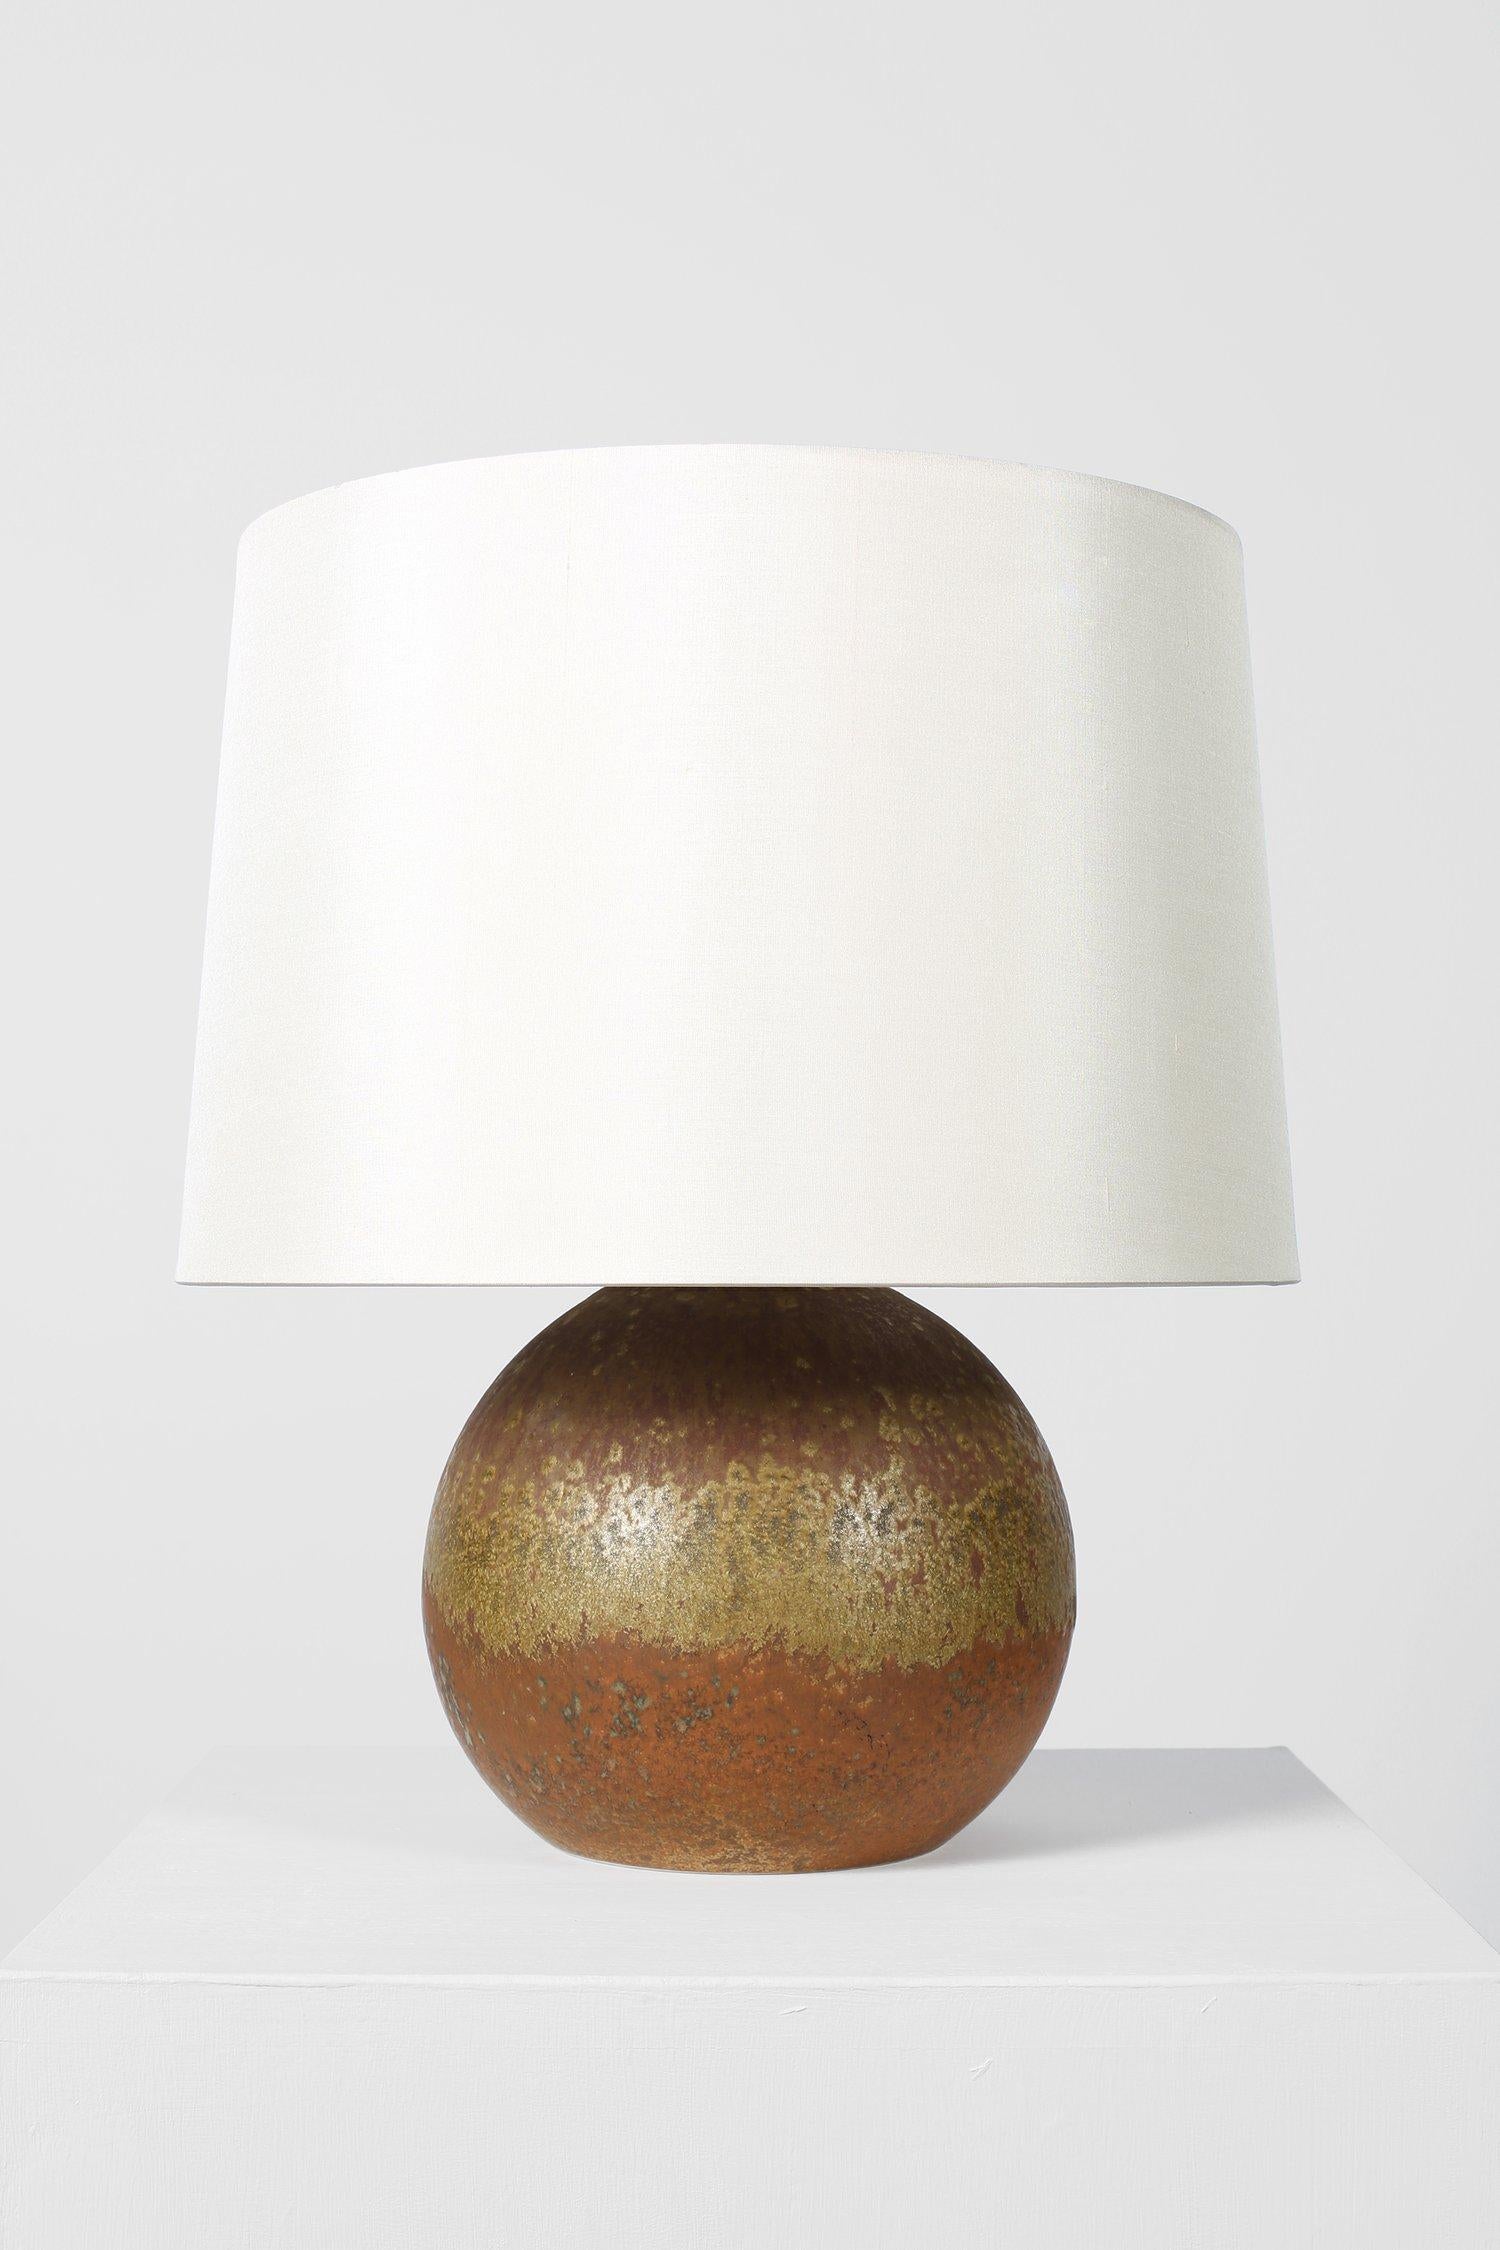 An earthy speckle glazed porcelain spherical table lamp.
France, 1960s
Measures: With the shade: 40.5 cm high
Lamp base only: 24.5 cm
Shade diameter 35 cm.